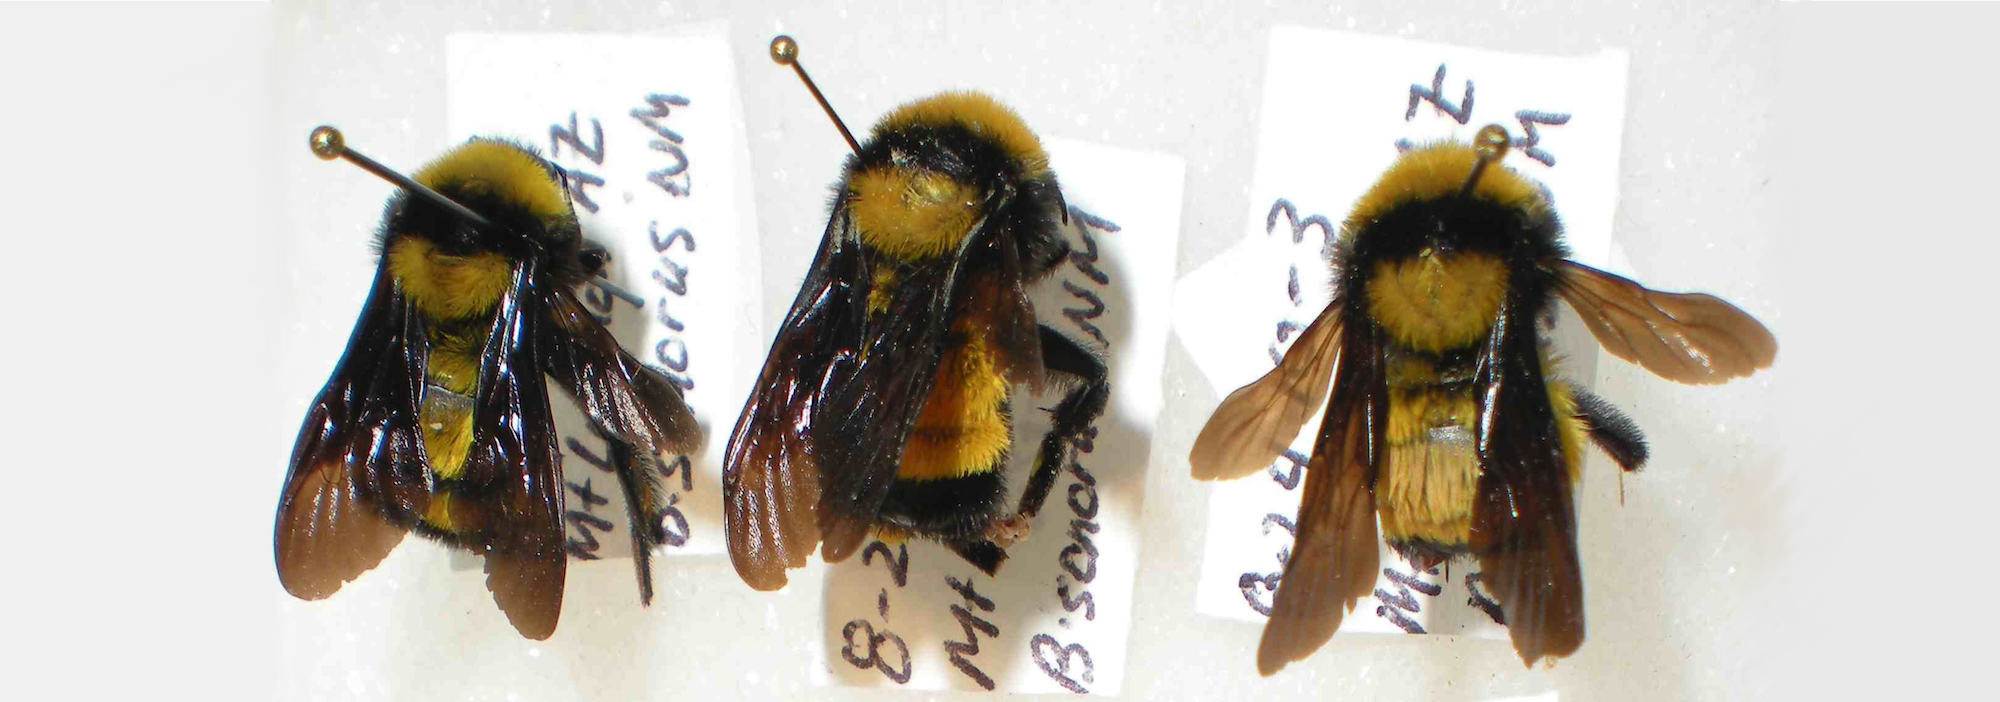 pinned bumble bees